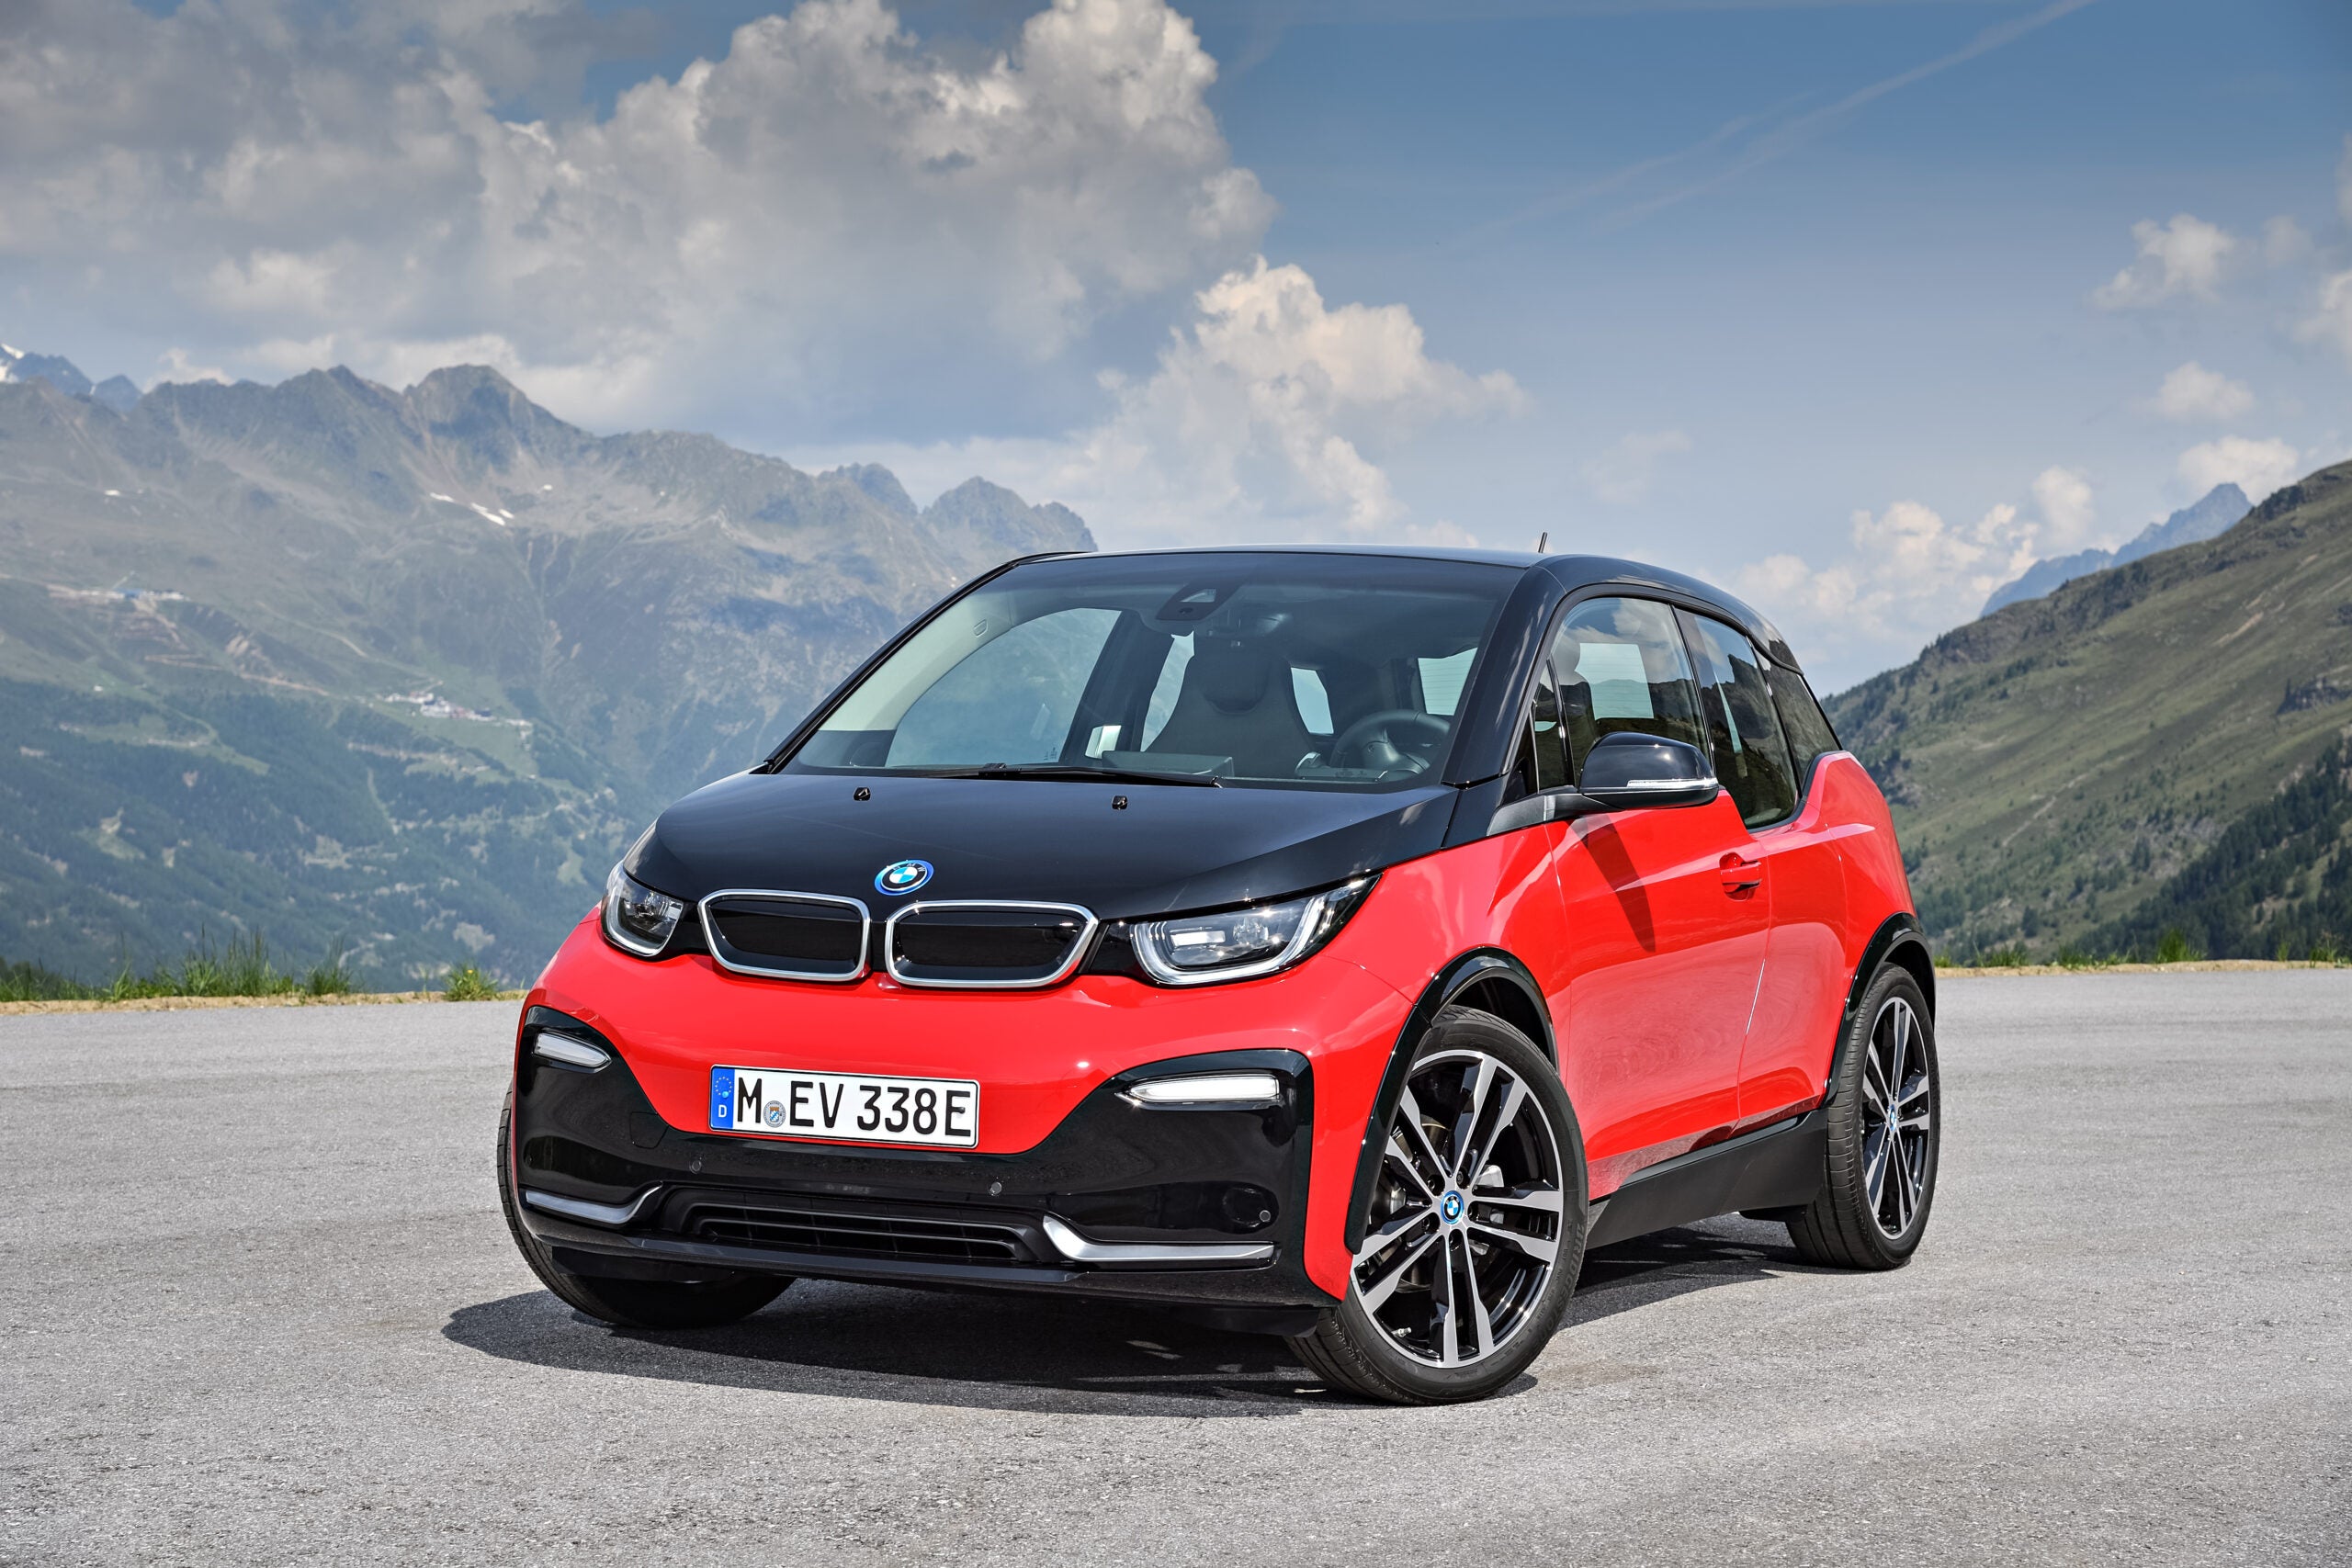 2018 BMW i3 offers a take daily driving